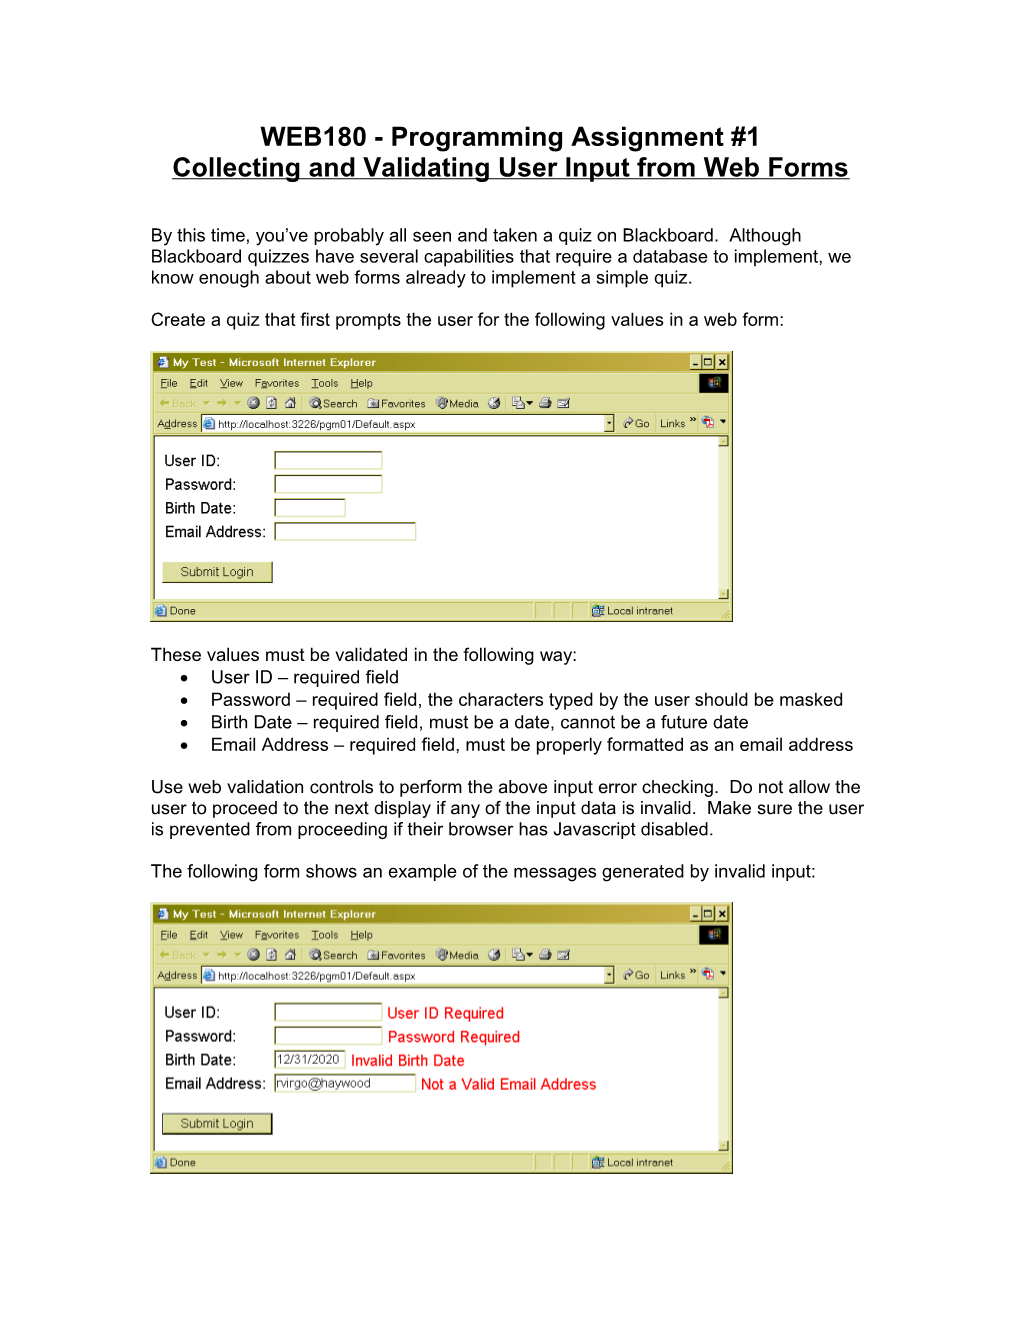 Collecting and Validating User Input from Web Forms